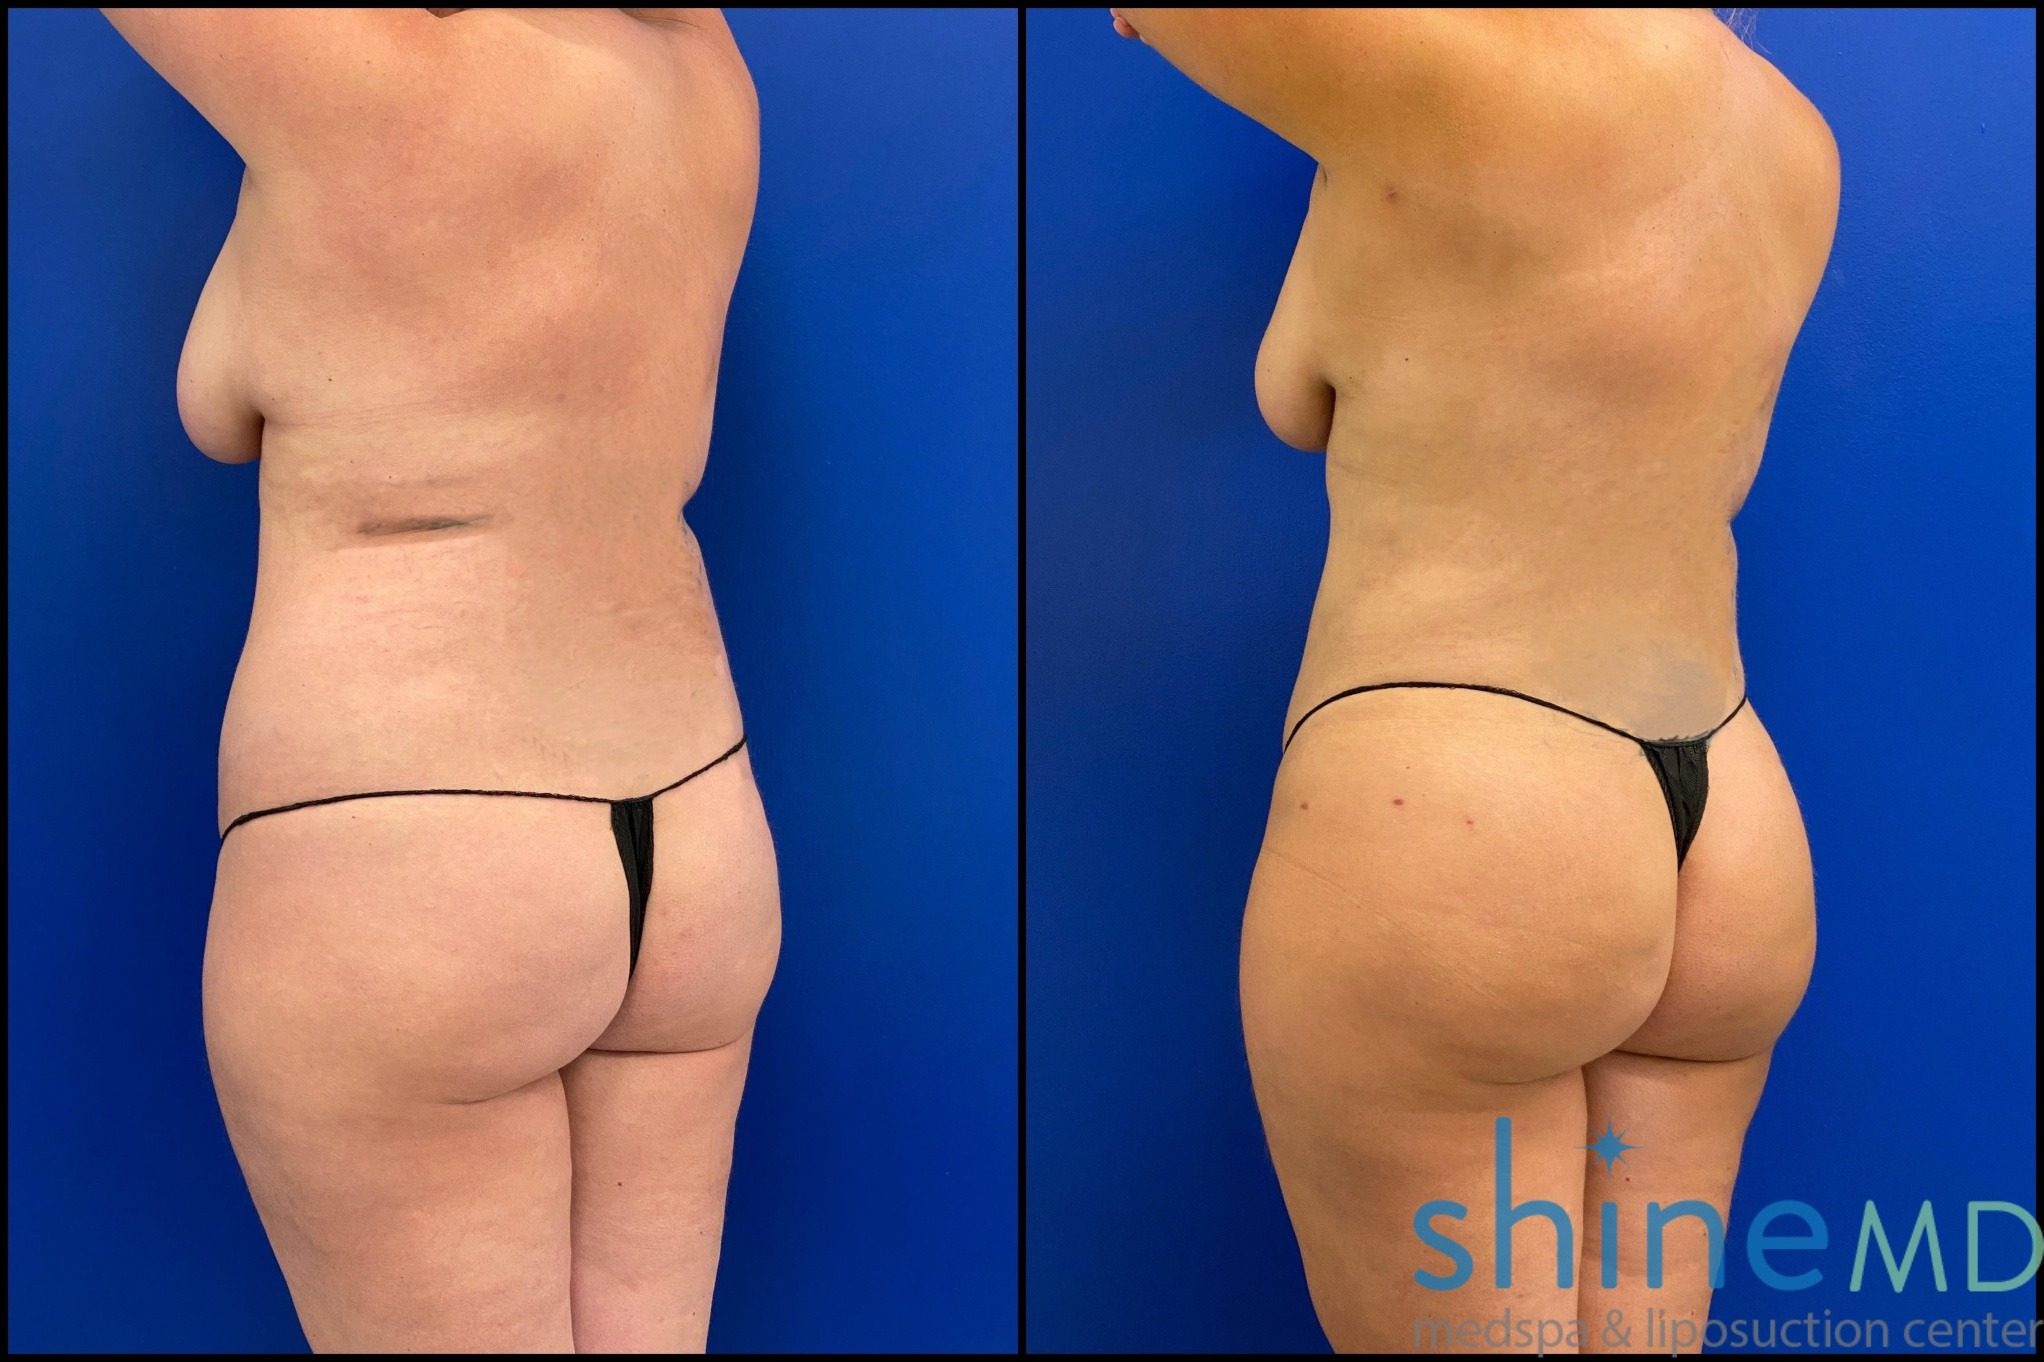 Brazilian butt lift before and after pictures